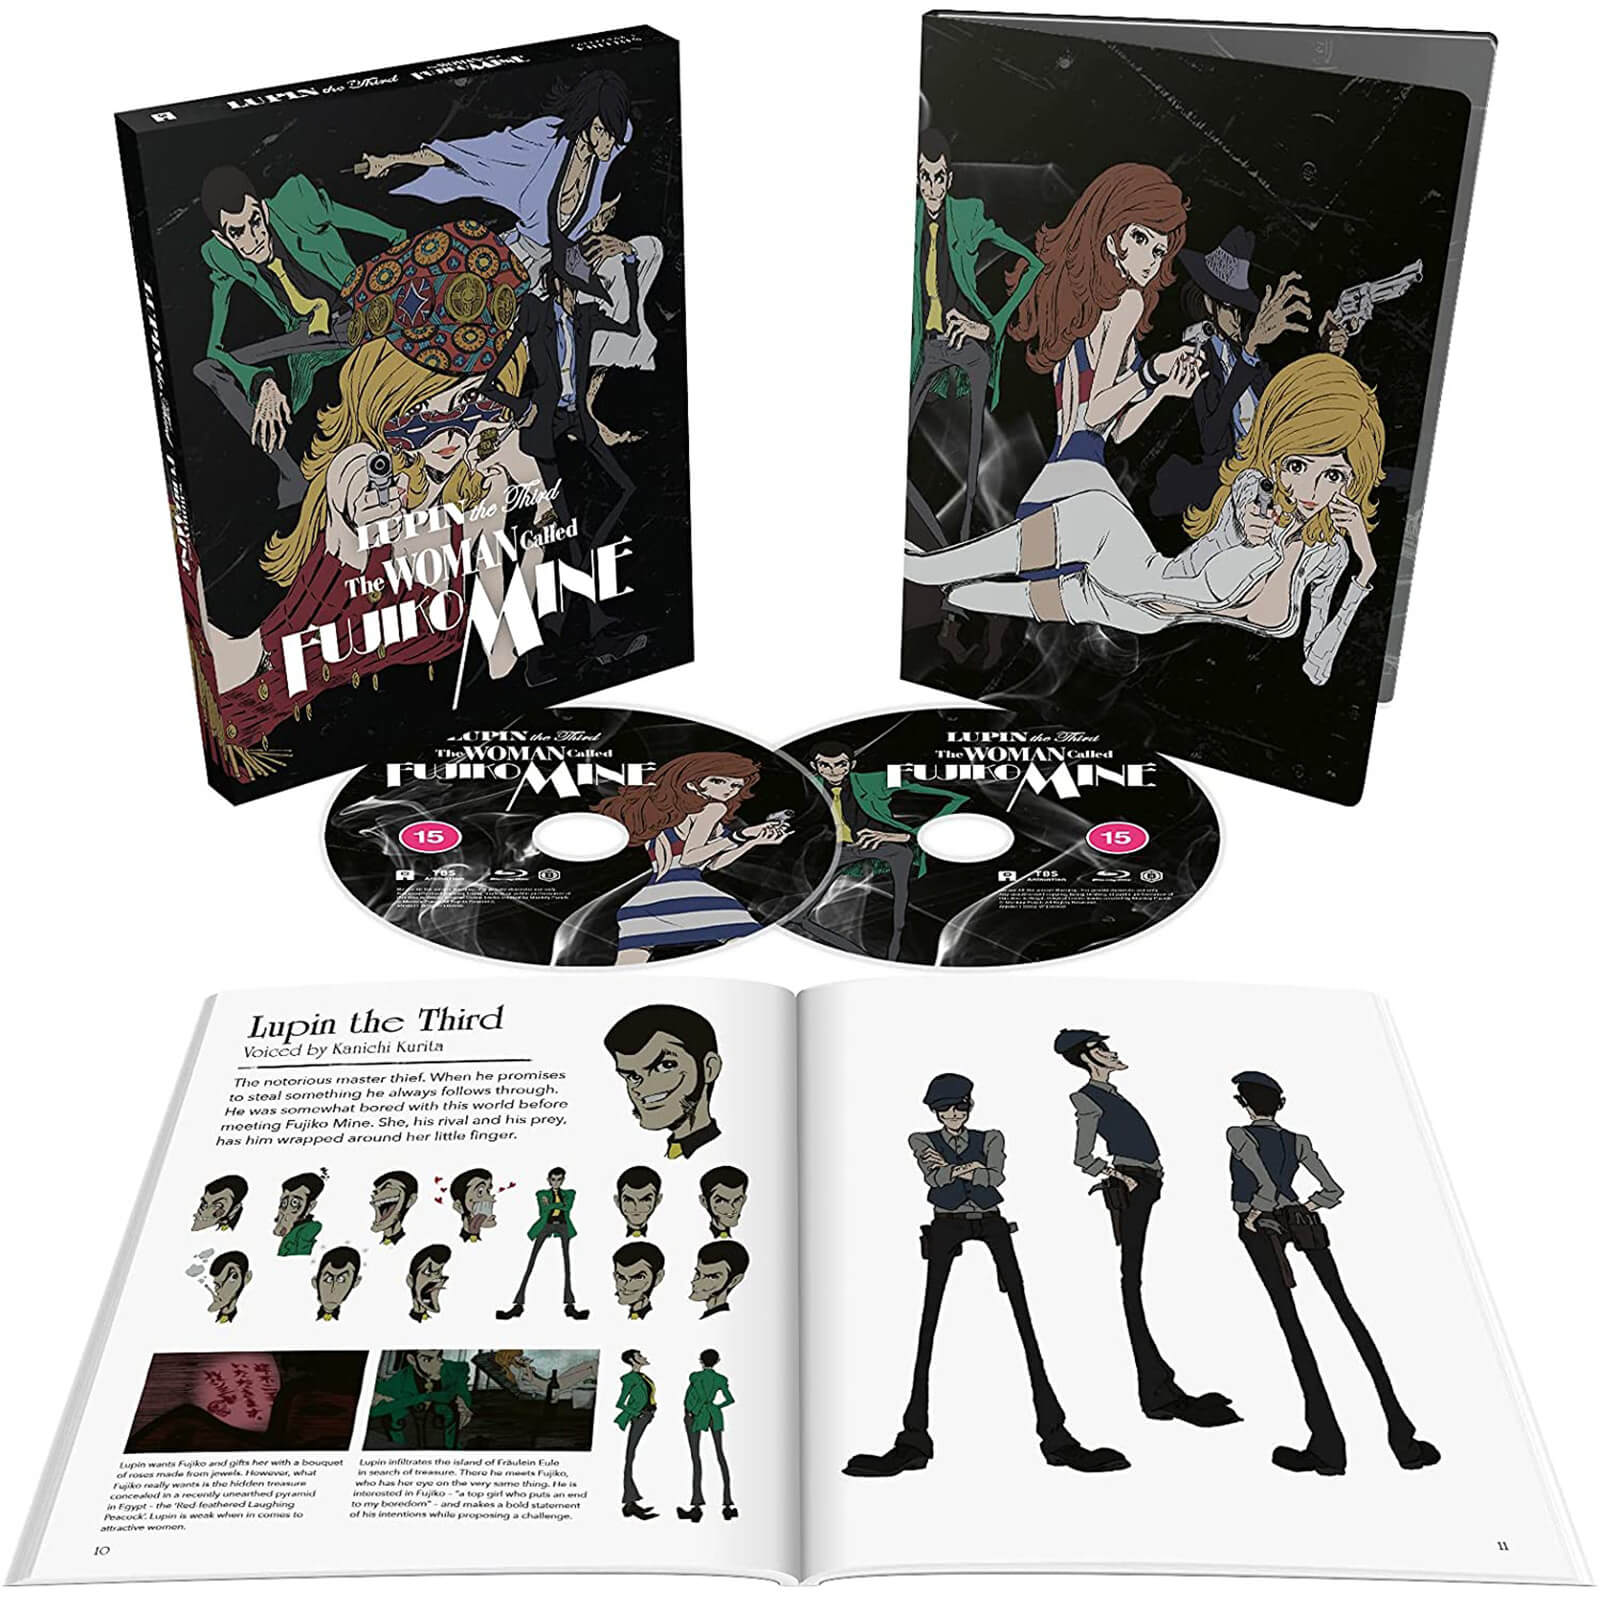 Lupin III: The Woman Called Fujiko Mine - Collector's Limited Edition